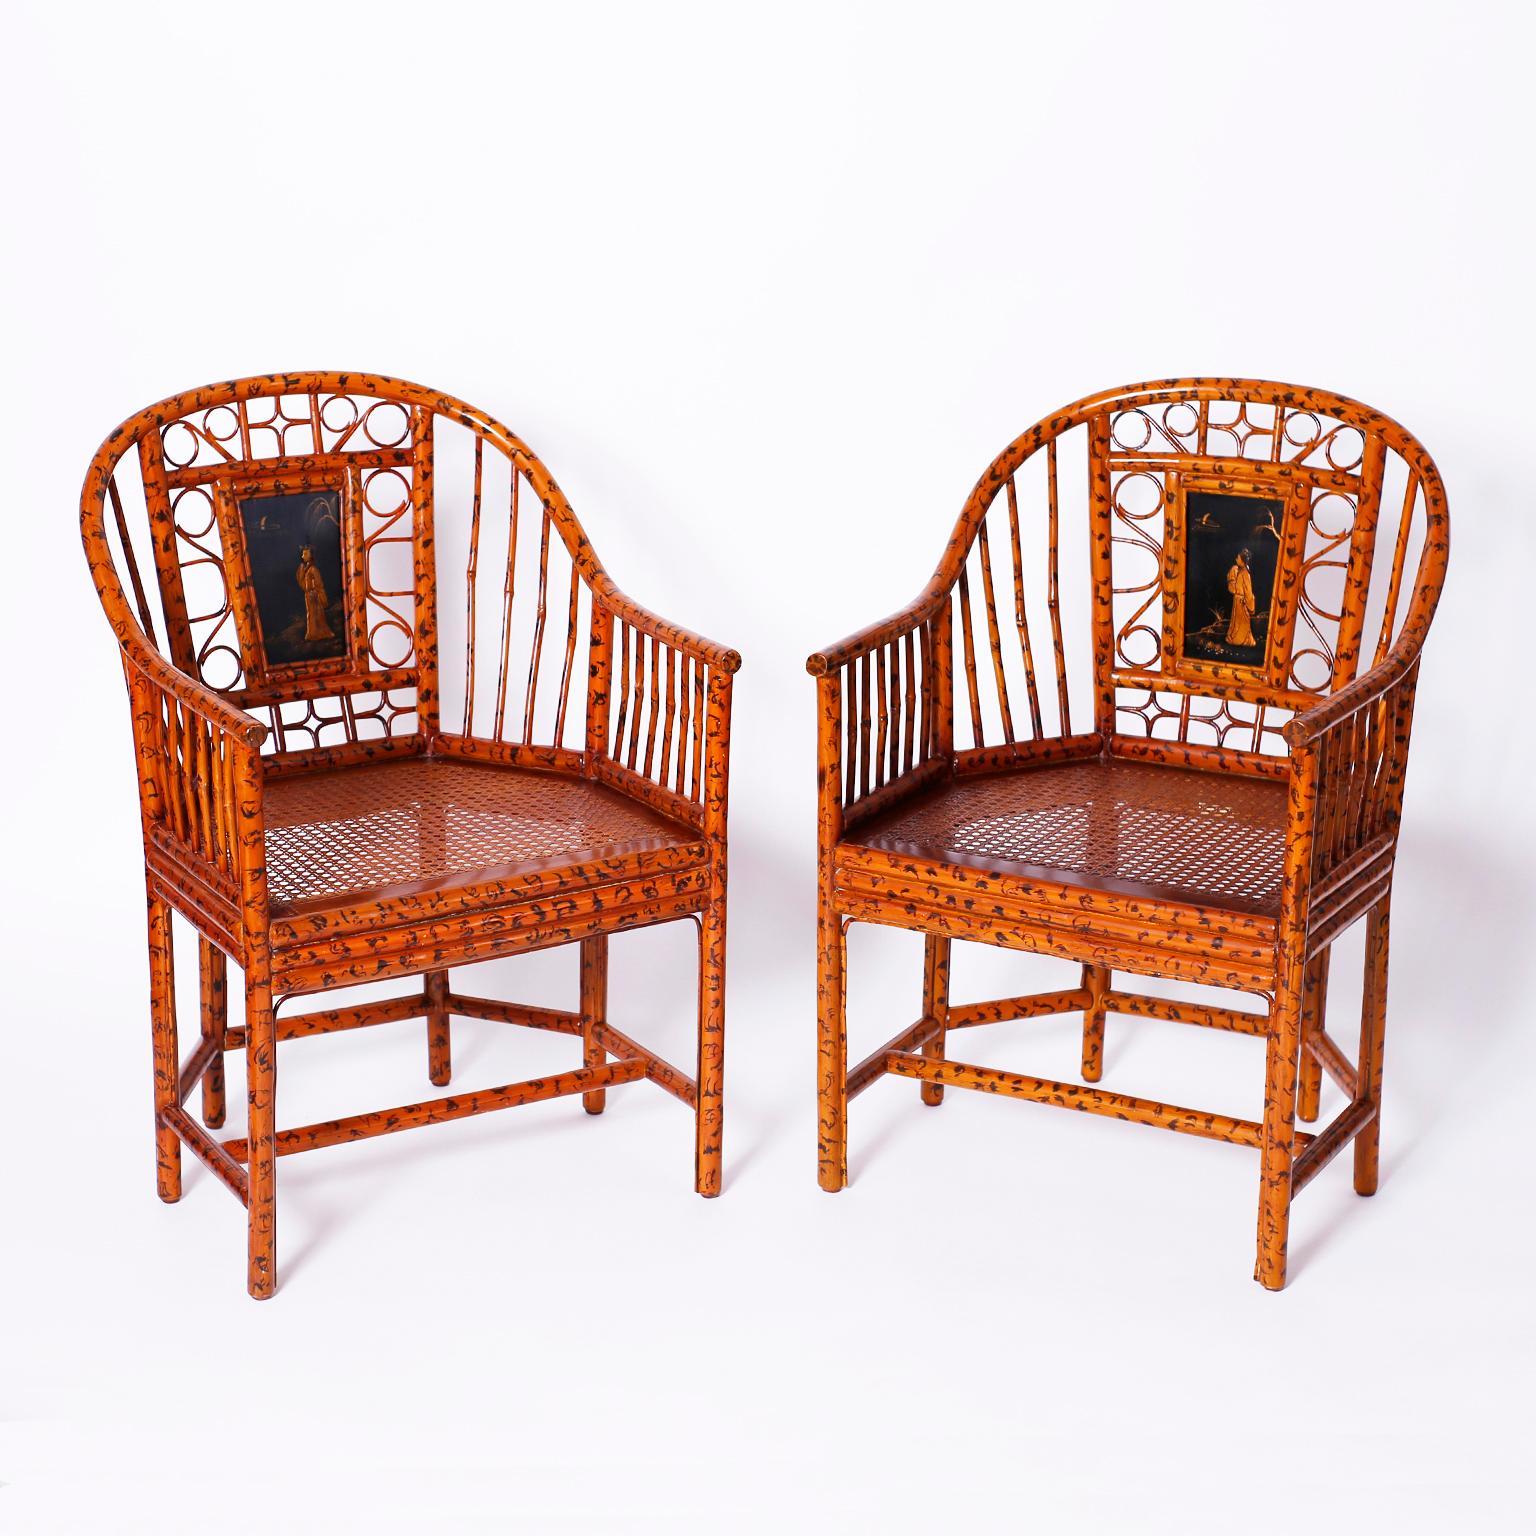 Chinoiserie Pair of Faux Bamboo Brighton Pavilion Chairs